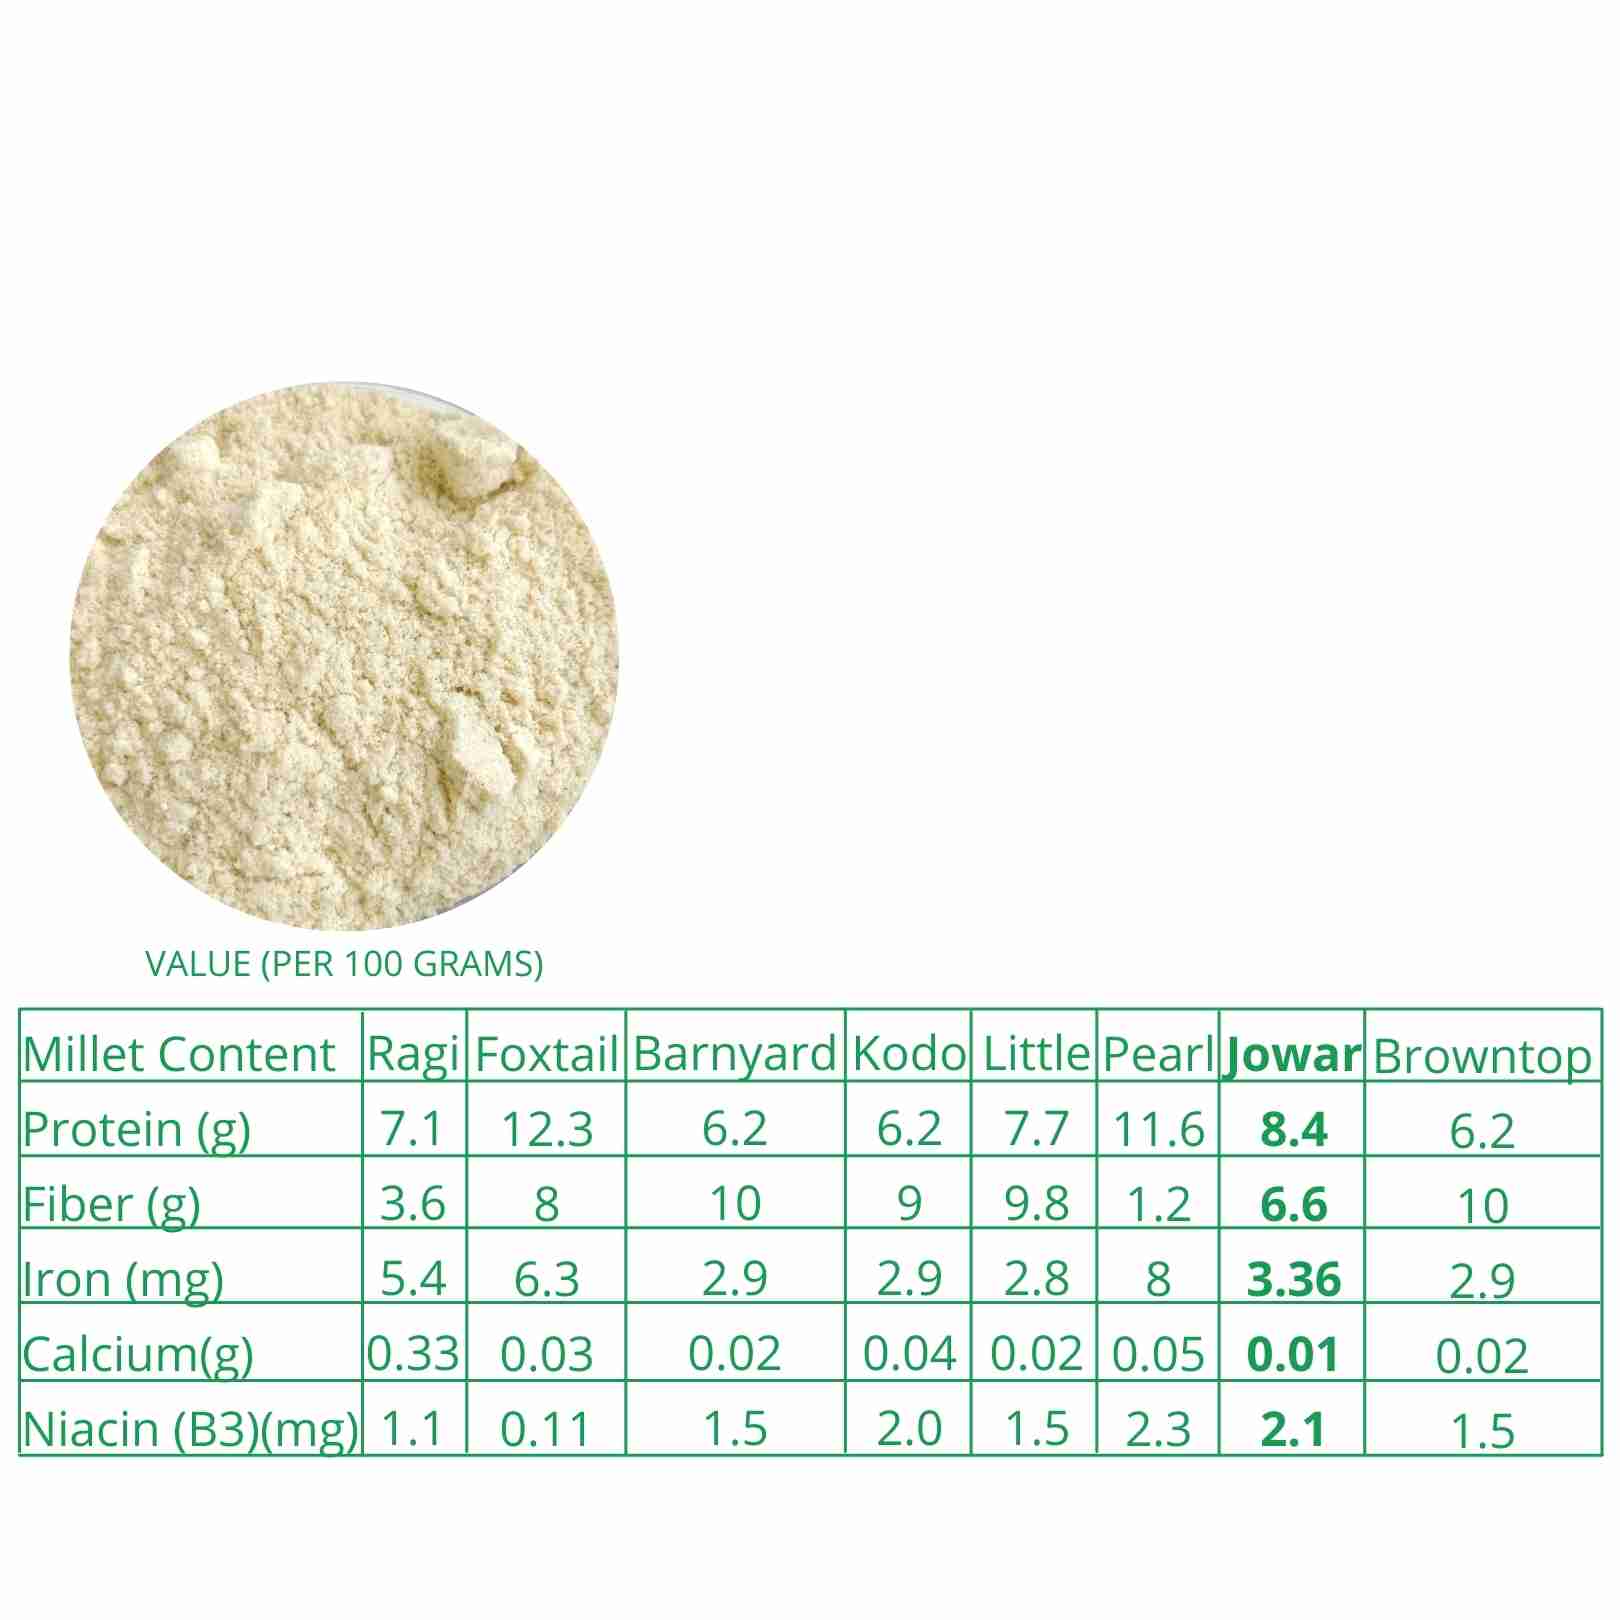 Millet Amma’s Organic Jowar Millet Flour- Millet Amma’s Organic Jowar Millet Flour that is rich in Protein.  Unpolished Jowar Millets, it is easily digestible and high in fibre.  Jowar Millet is packed with many health benefits like weight management and is also rich in micronutrients.